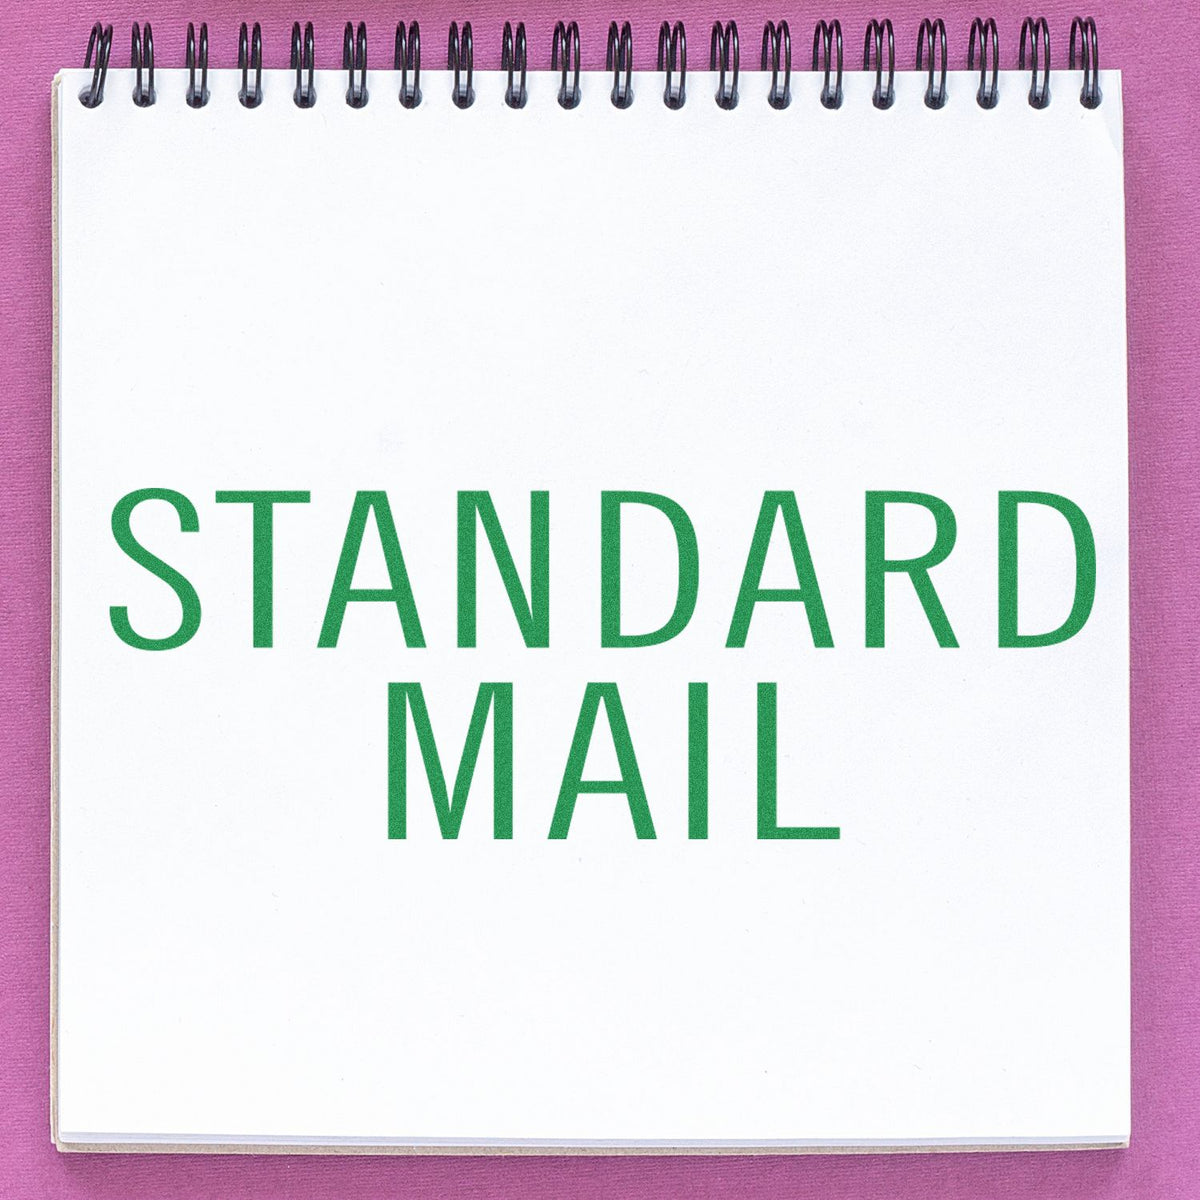 Slim Pre-Inked Standard Mail Stacked Stamp In Use